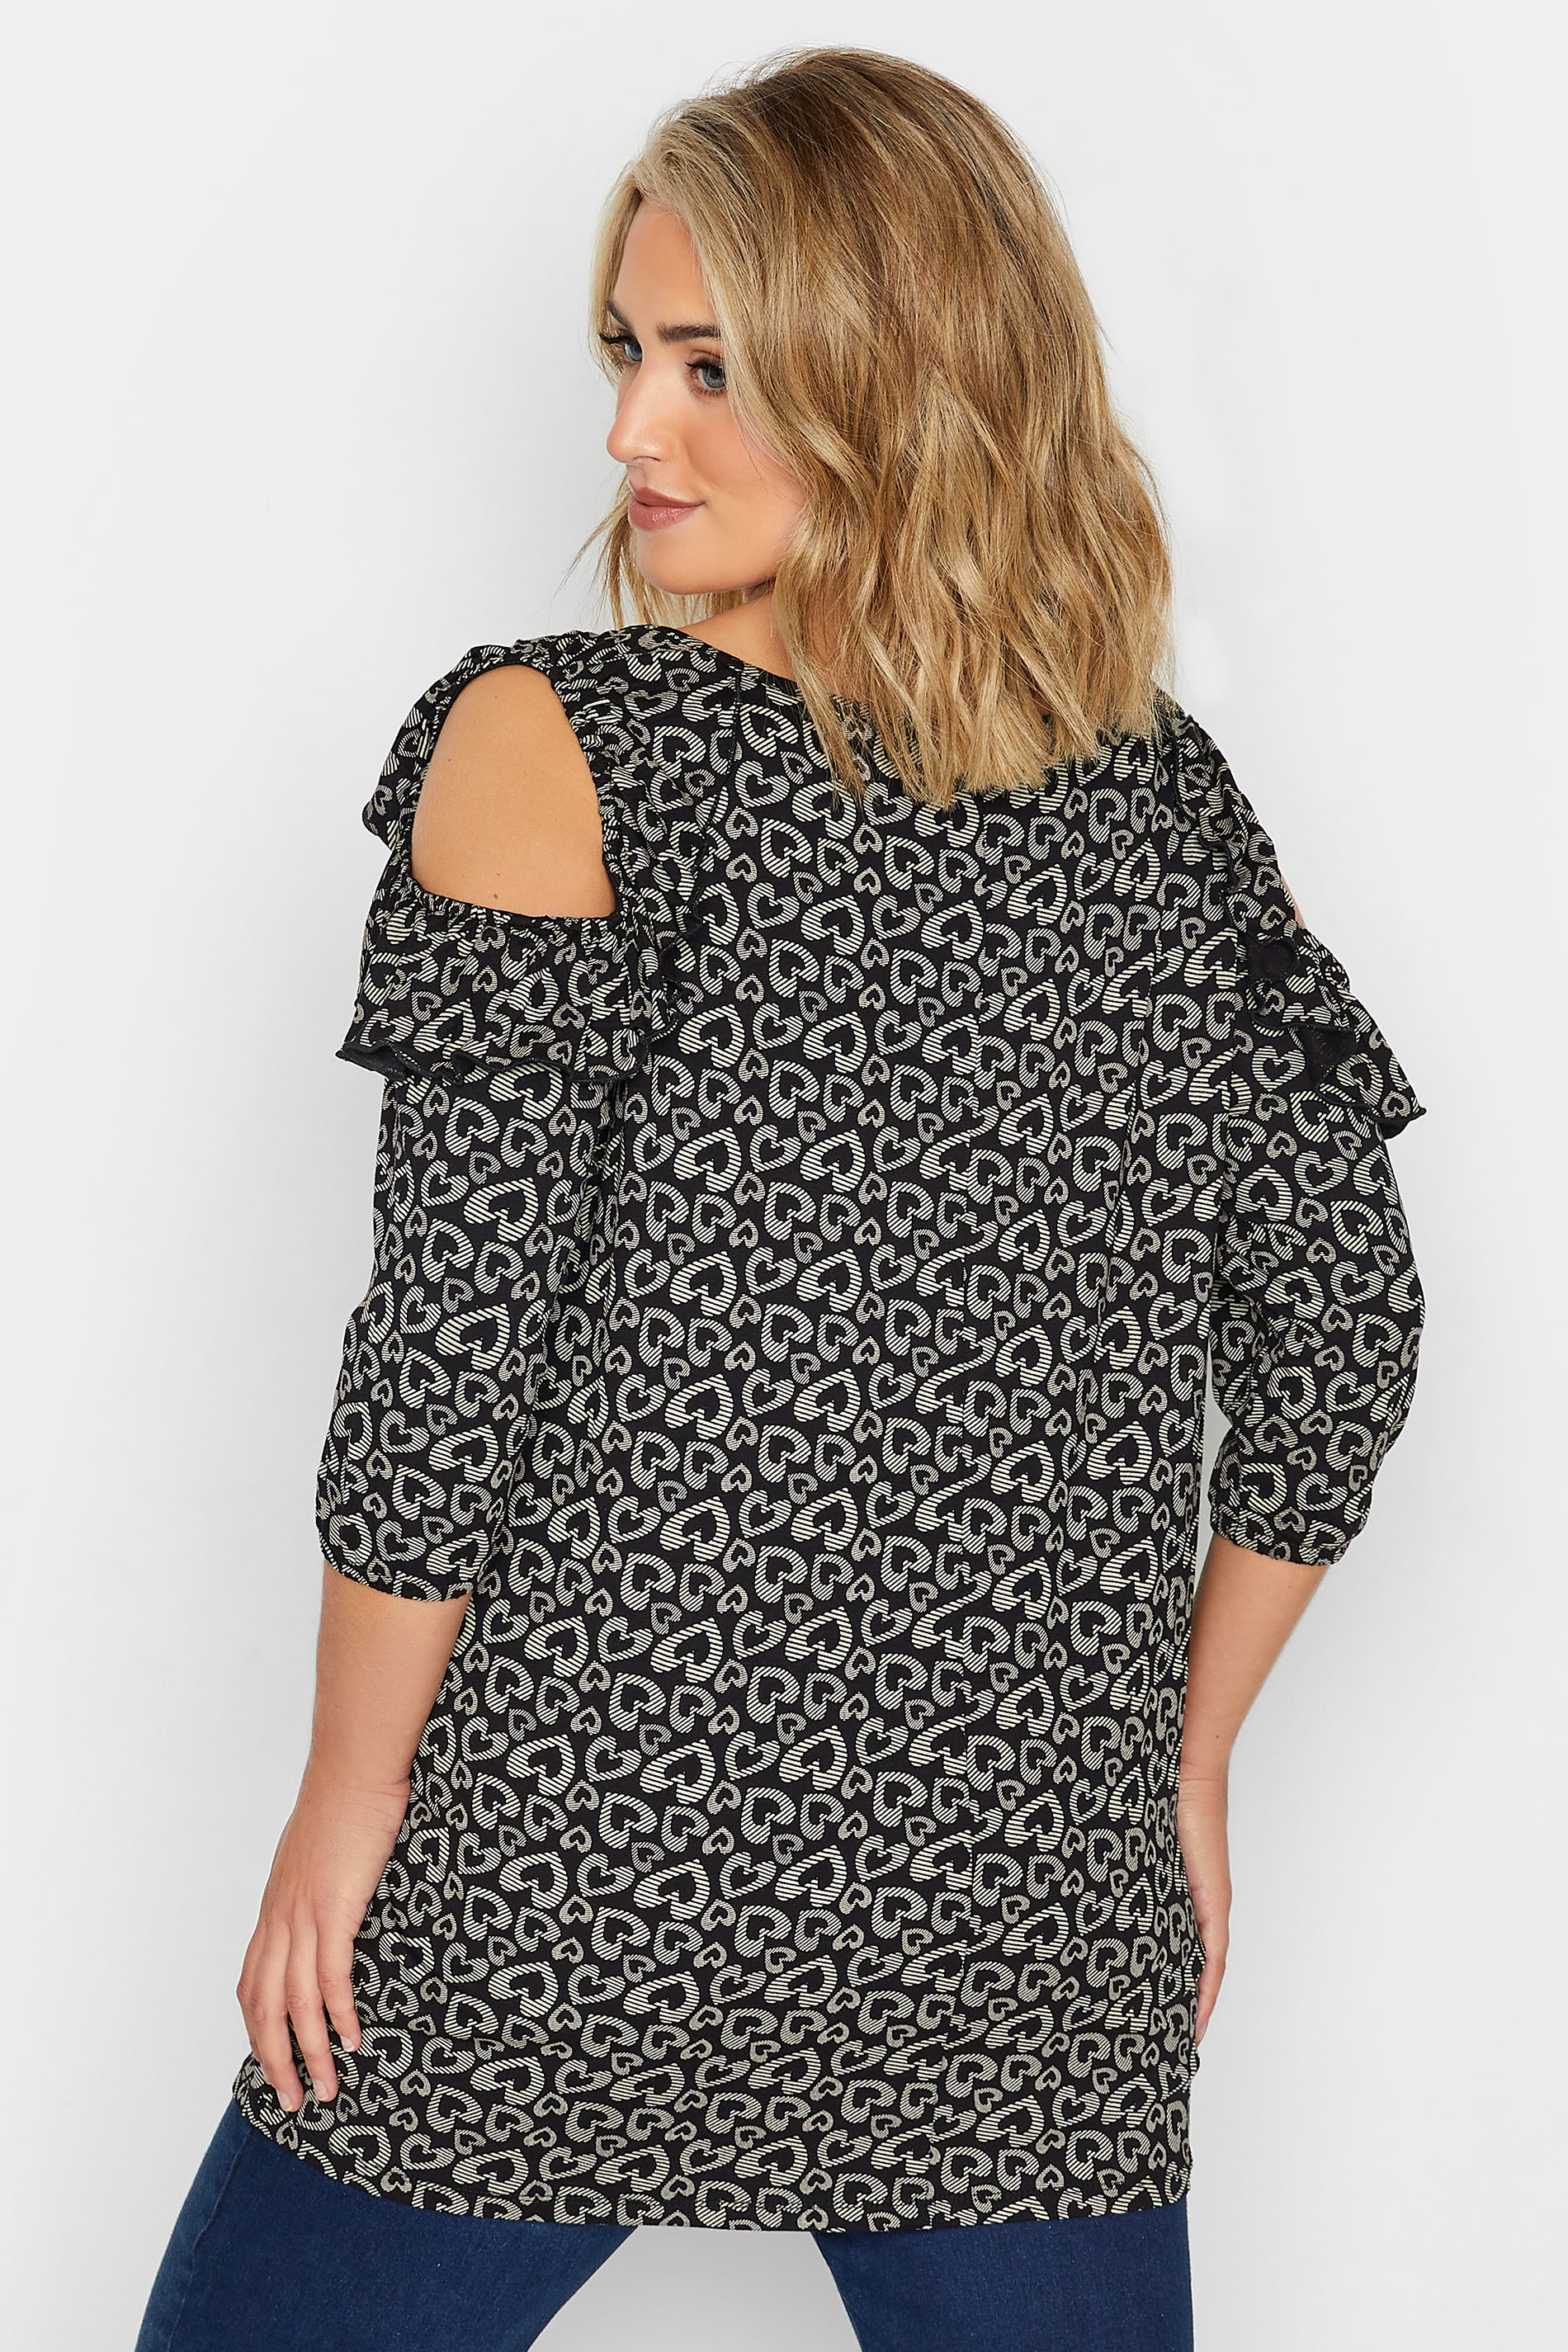 YOURS Plus Size Black Heart Print Cold Shoulder Top | Yours Clothing 3